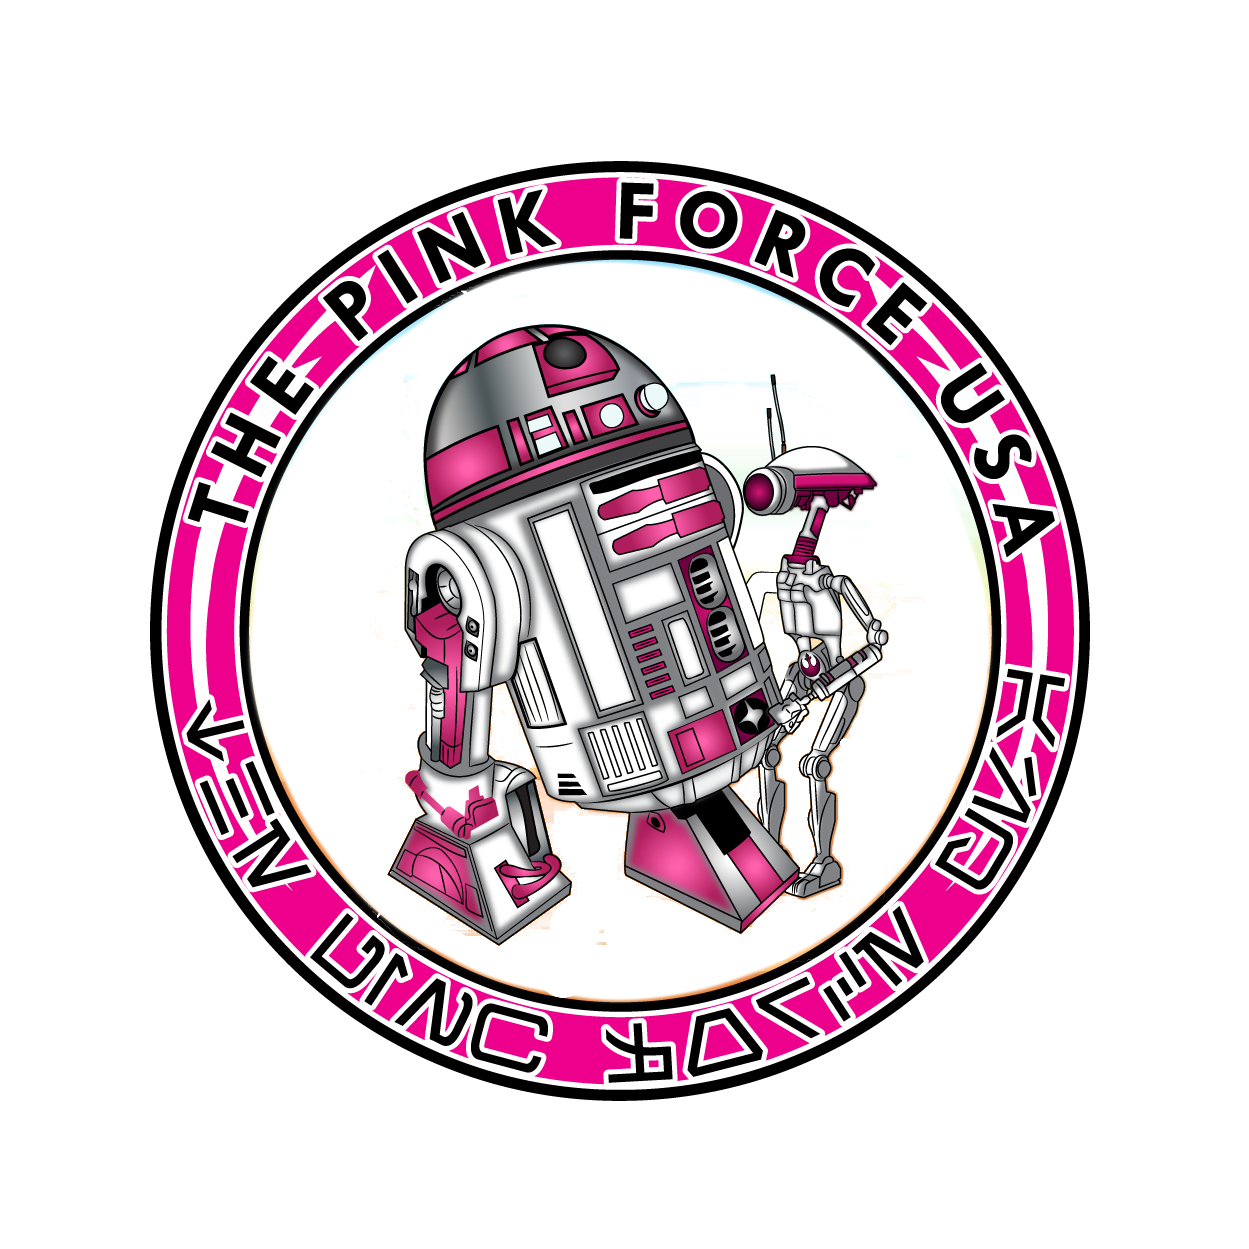 The Pink Force USA